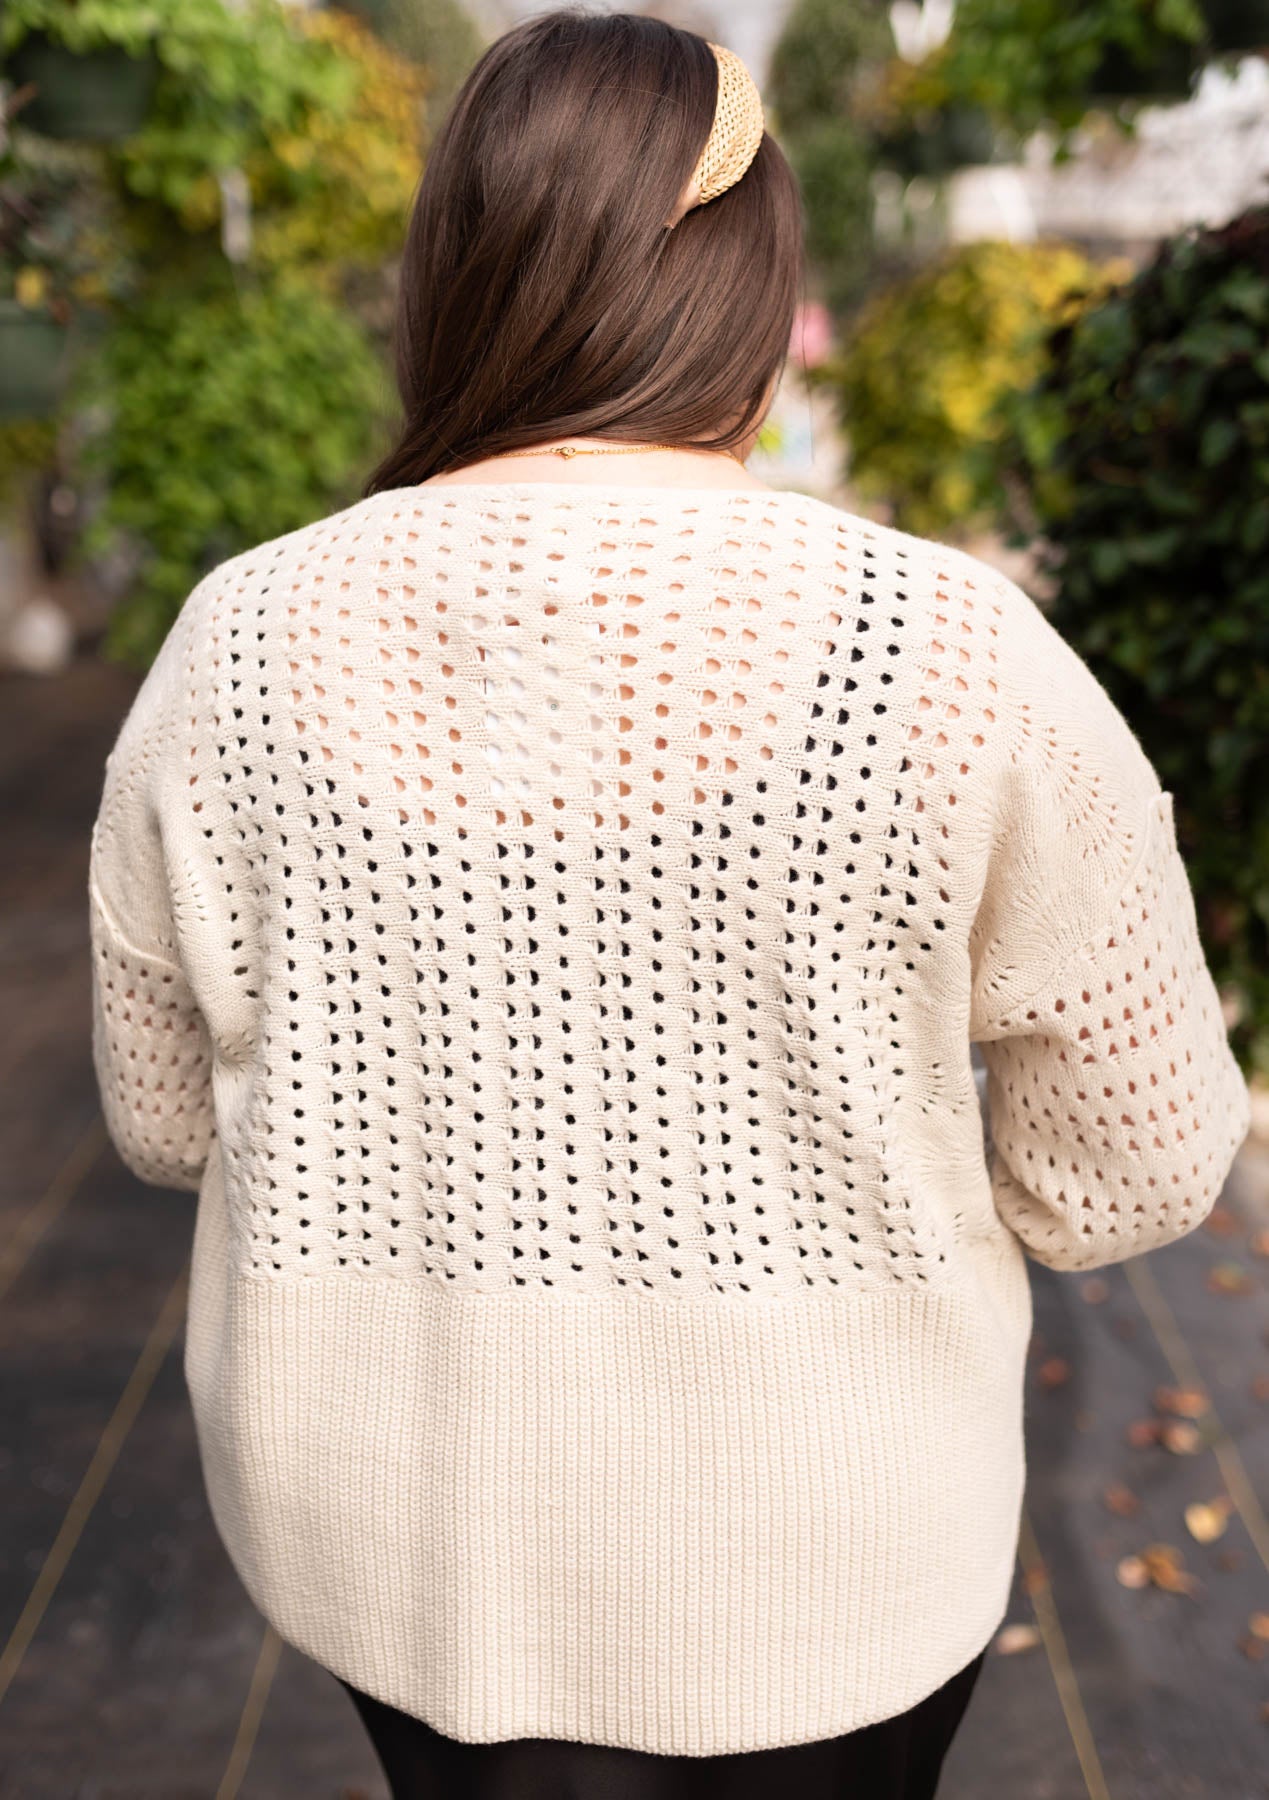 Back view of the plus size ivory knitted cardigan